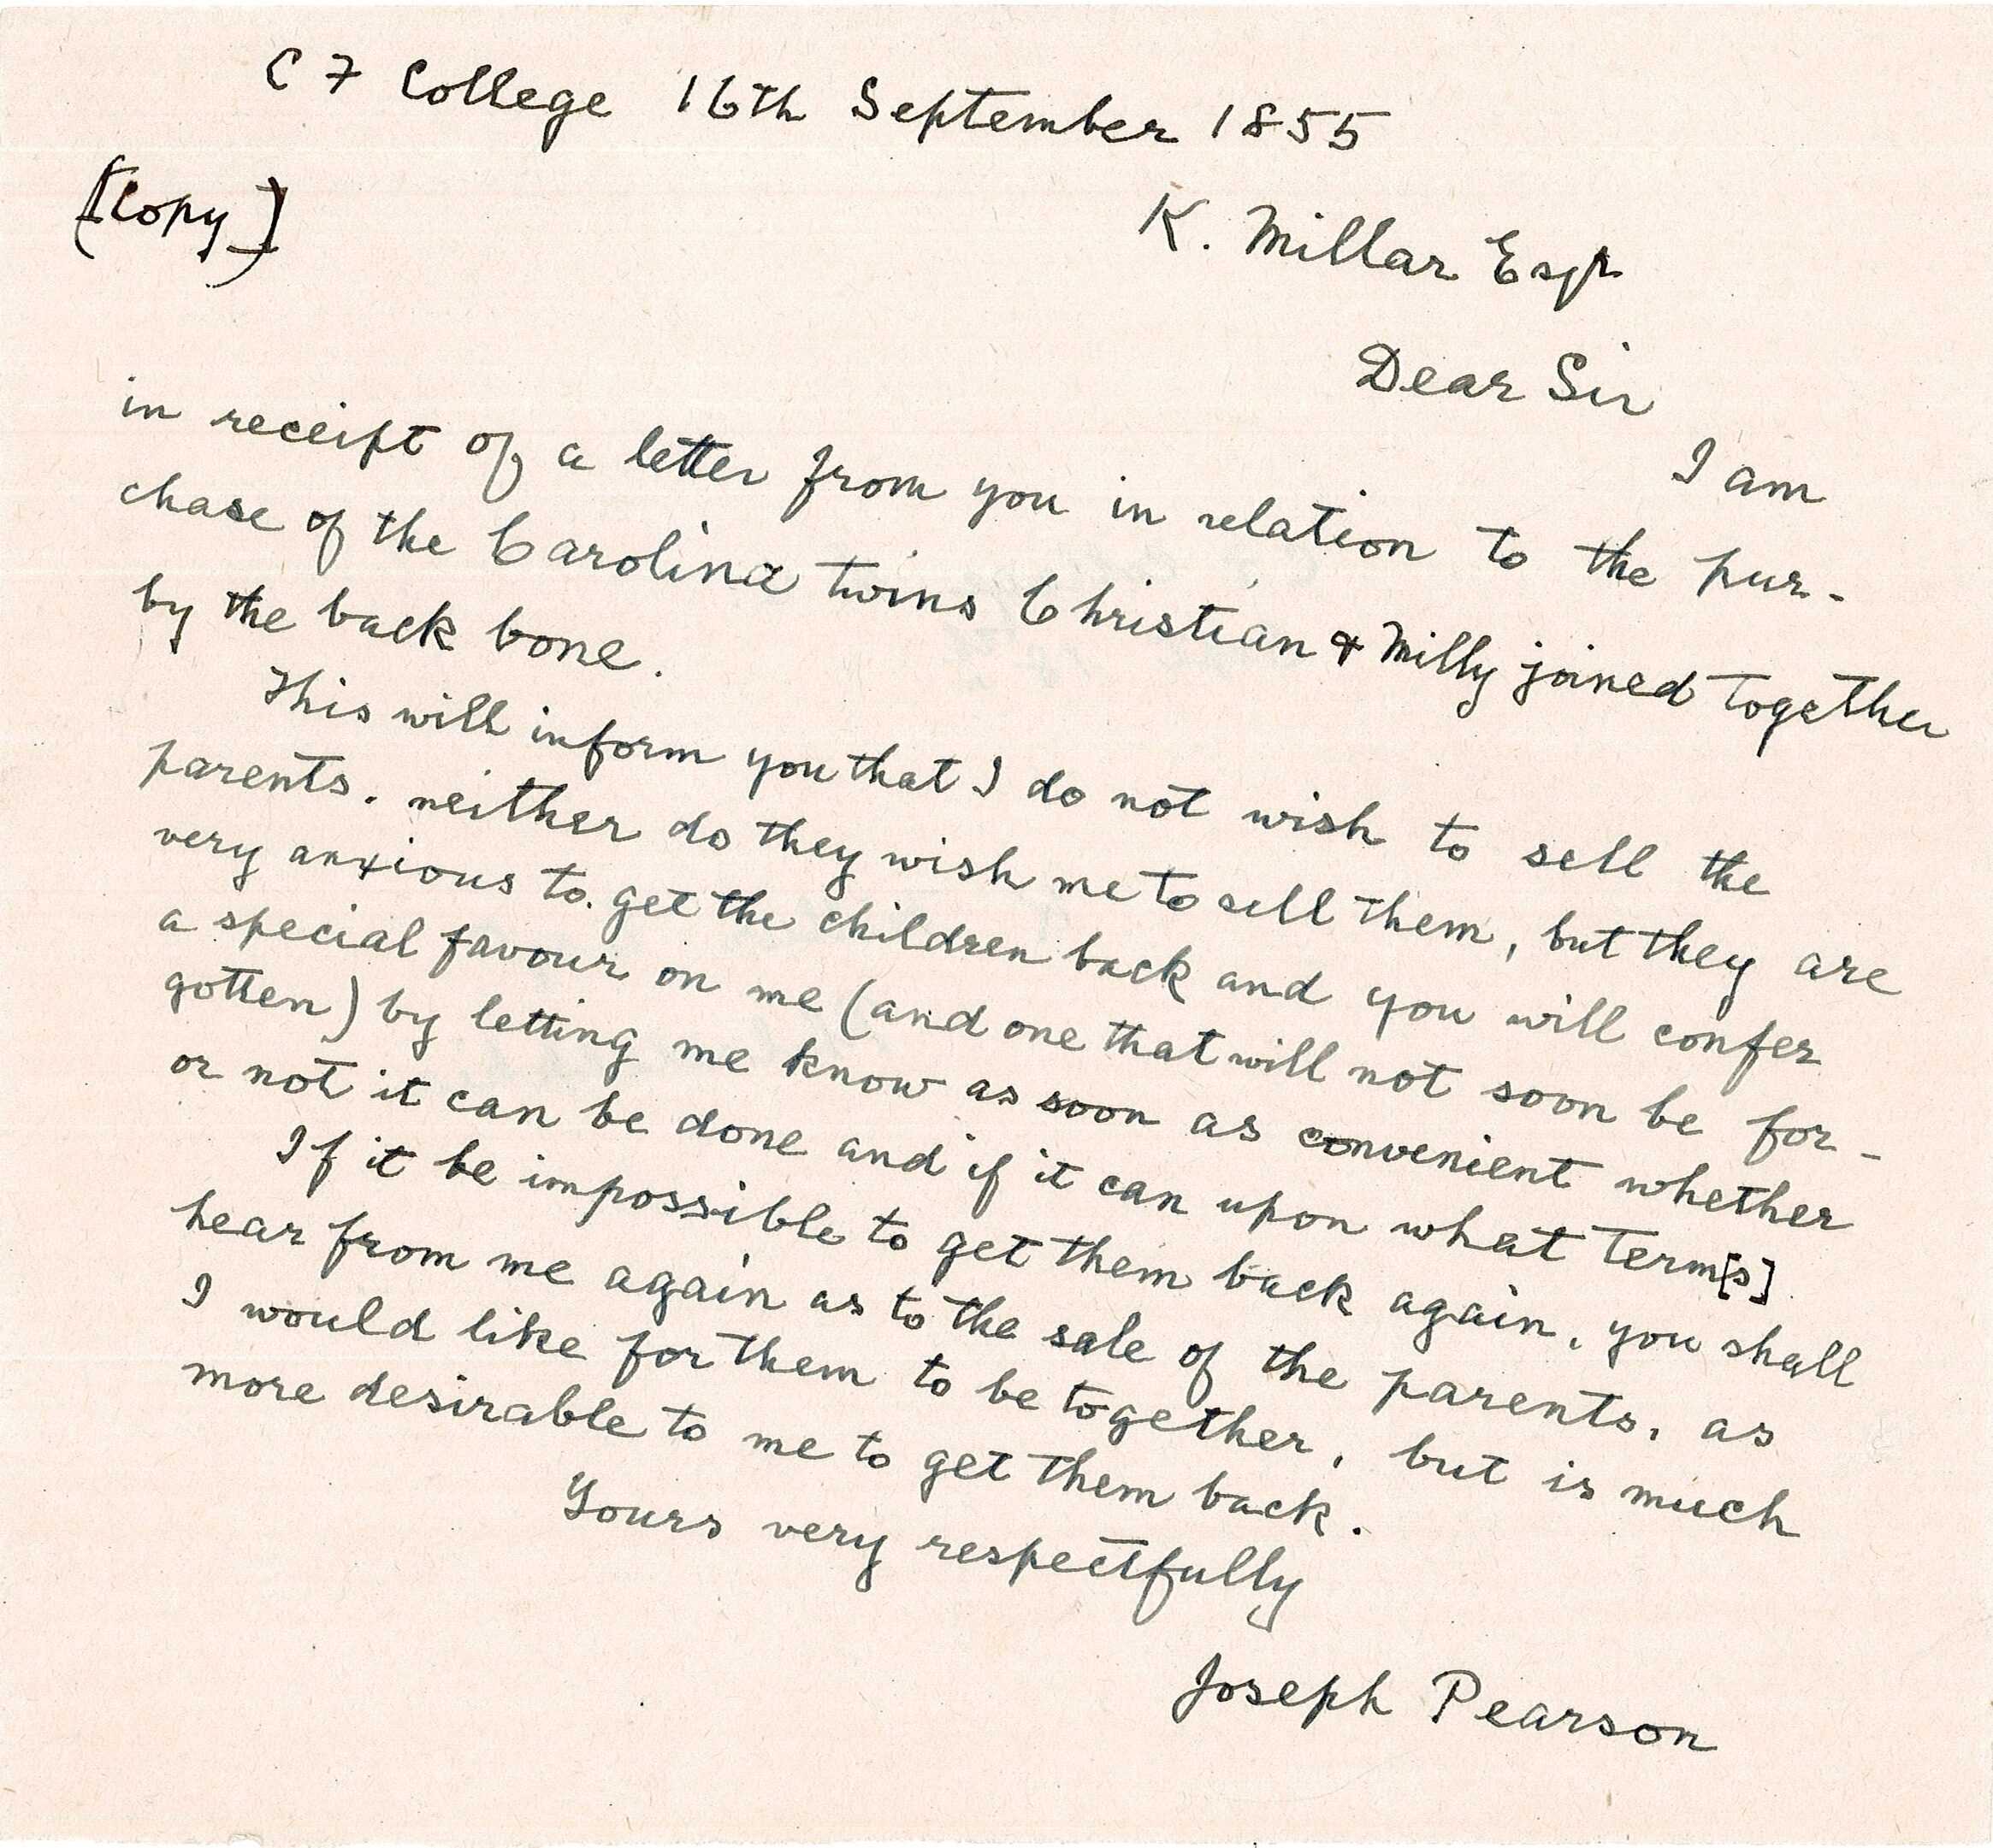 Image of handwritten letter signed by Joseph Pearson